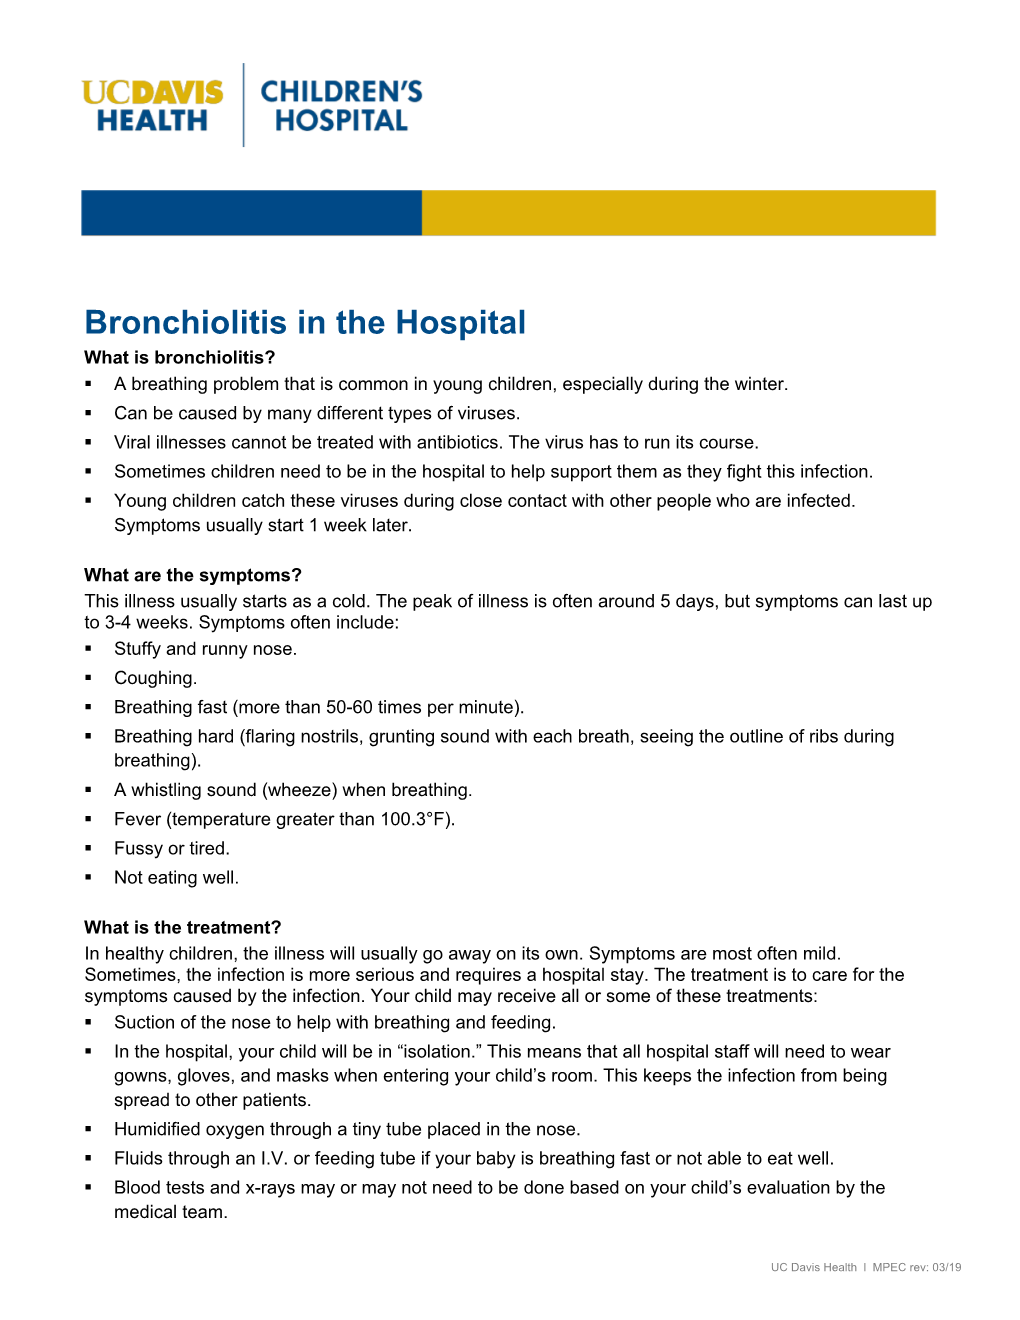 Bronchiolitis in the Hospital What Is Bronchiolitis? § a Breathing Problem That Is Common in Young Children, Especially During the Winter